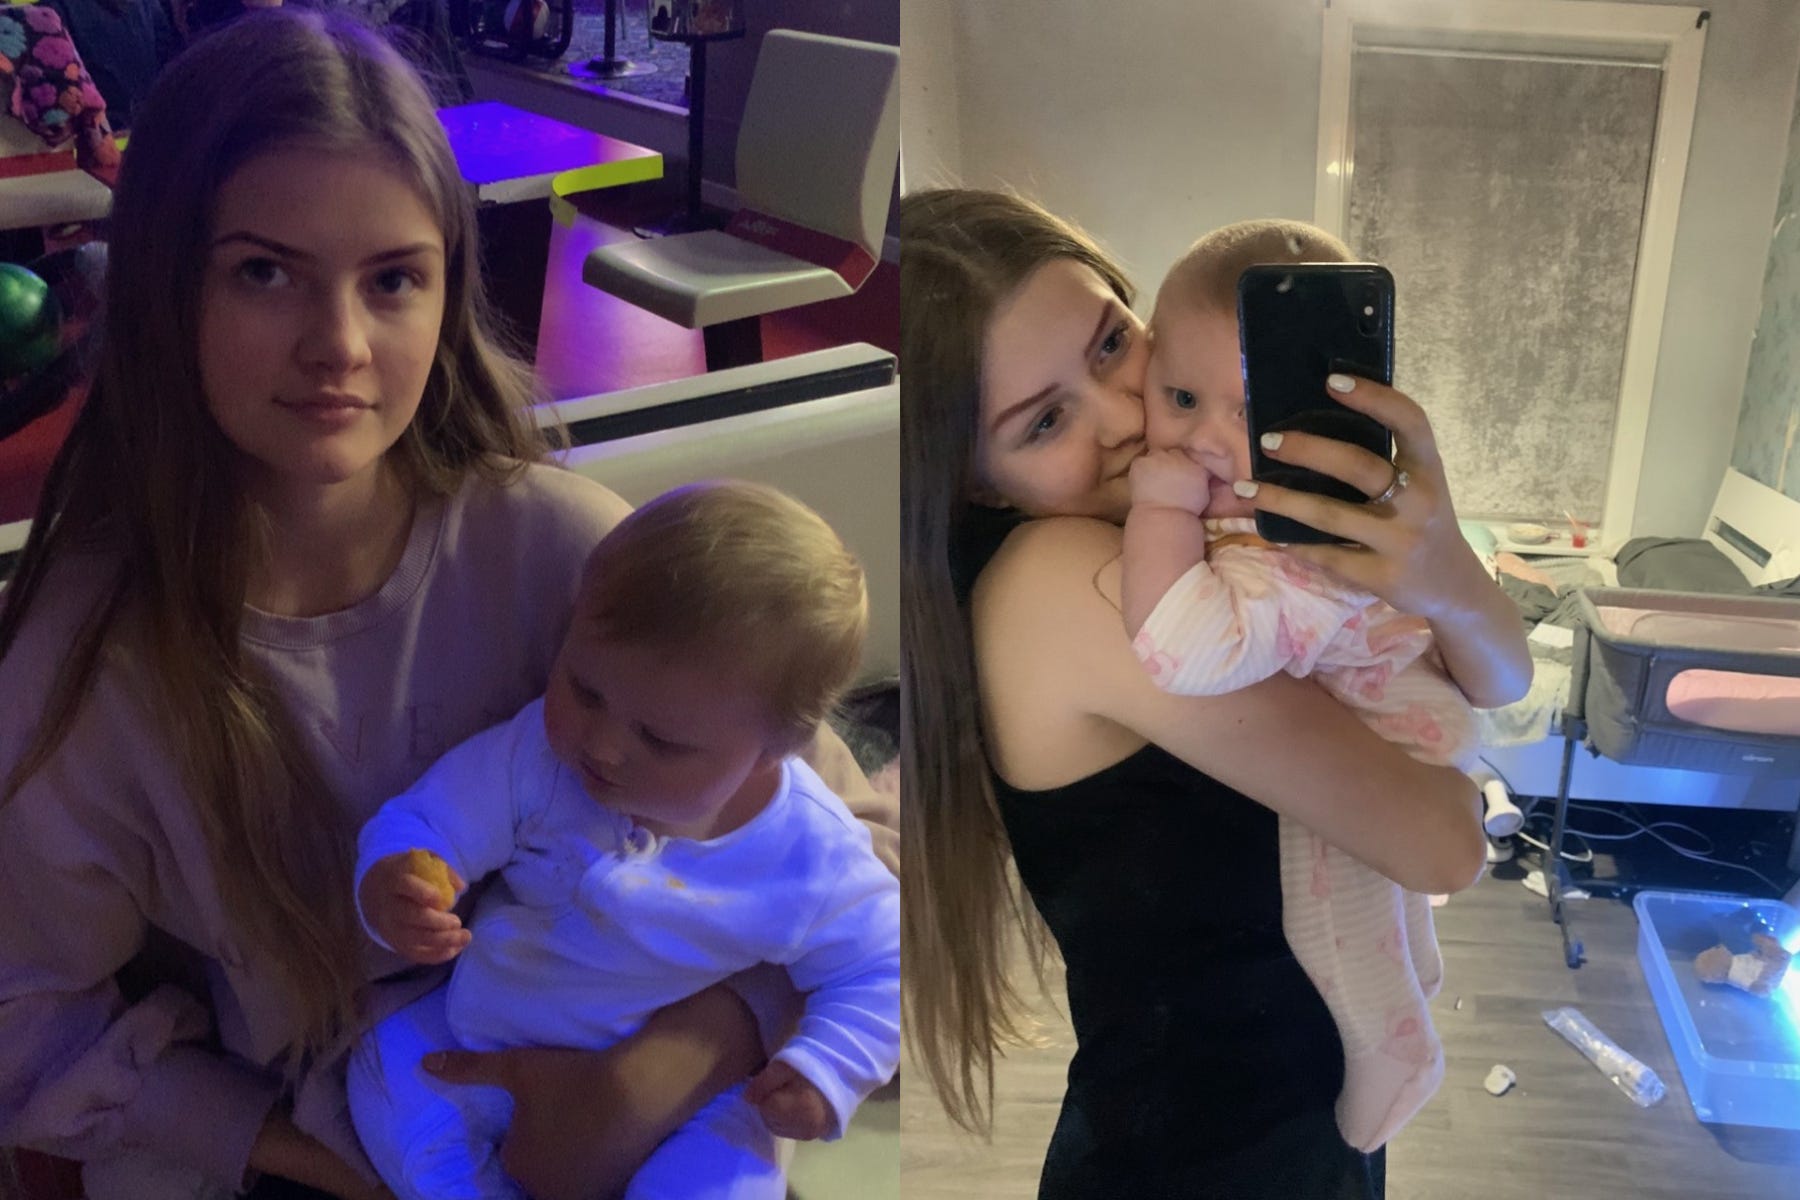 Saffron has accumulated around £2000 from her TikTok content so far (Collect/PA Real Life)